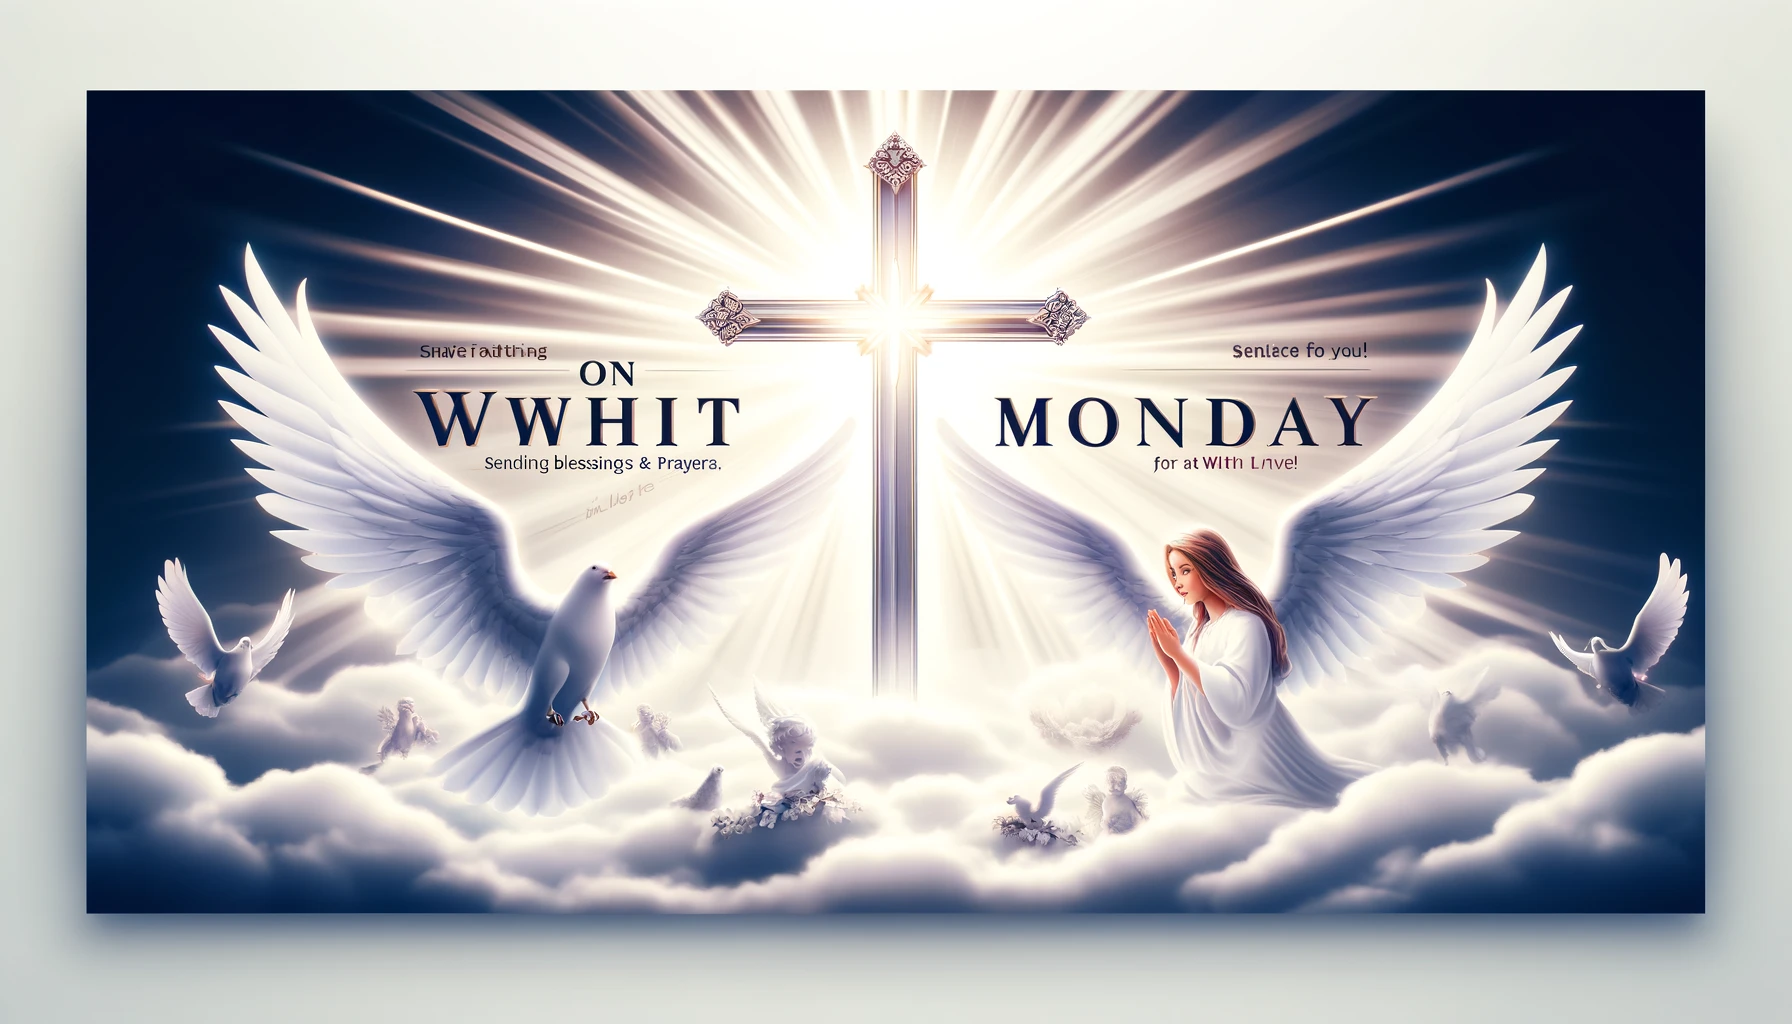 Whit Monday Greetings: Crafting the Perfect Message for Family and Friends